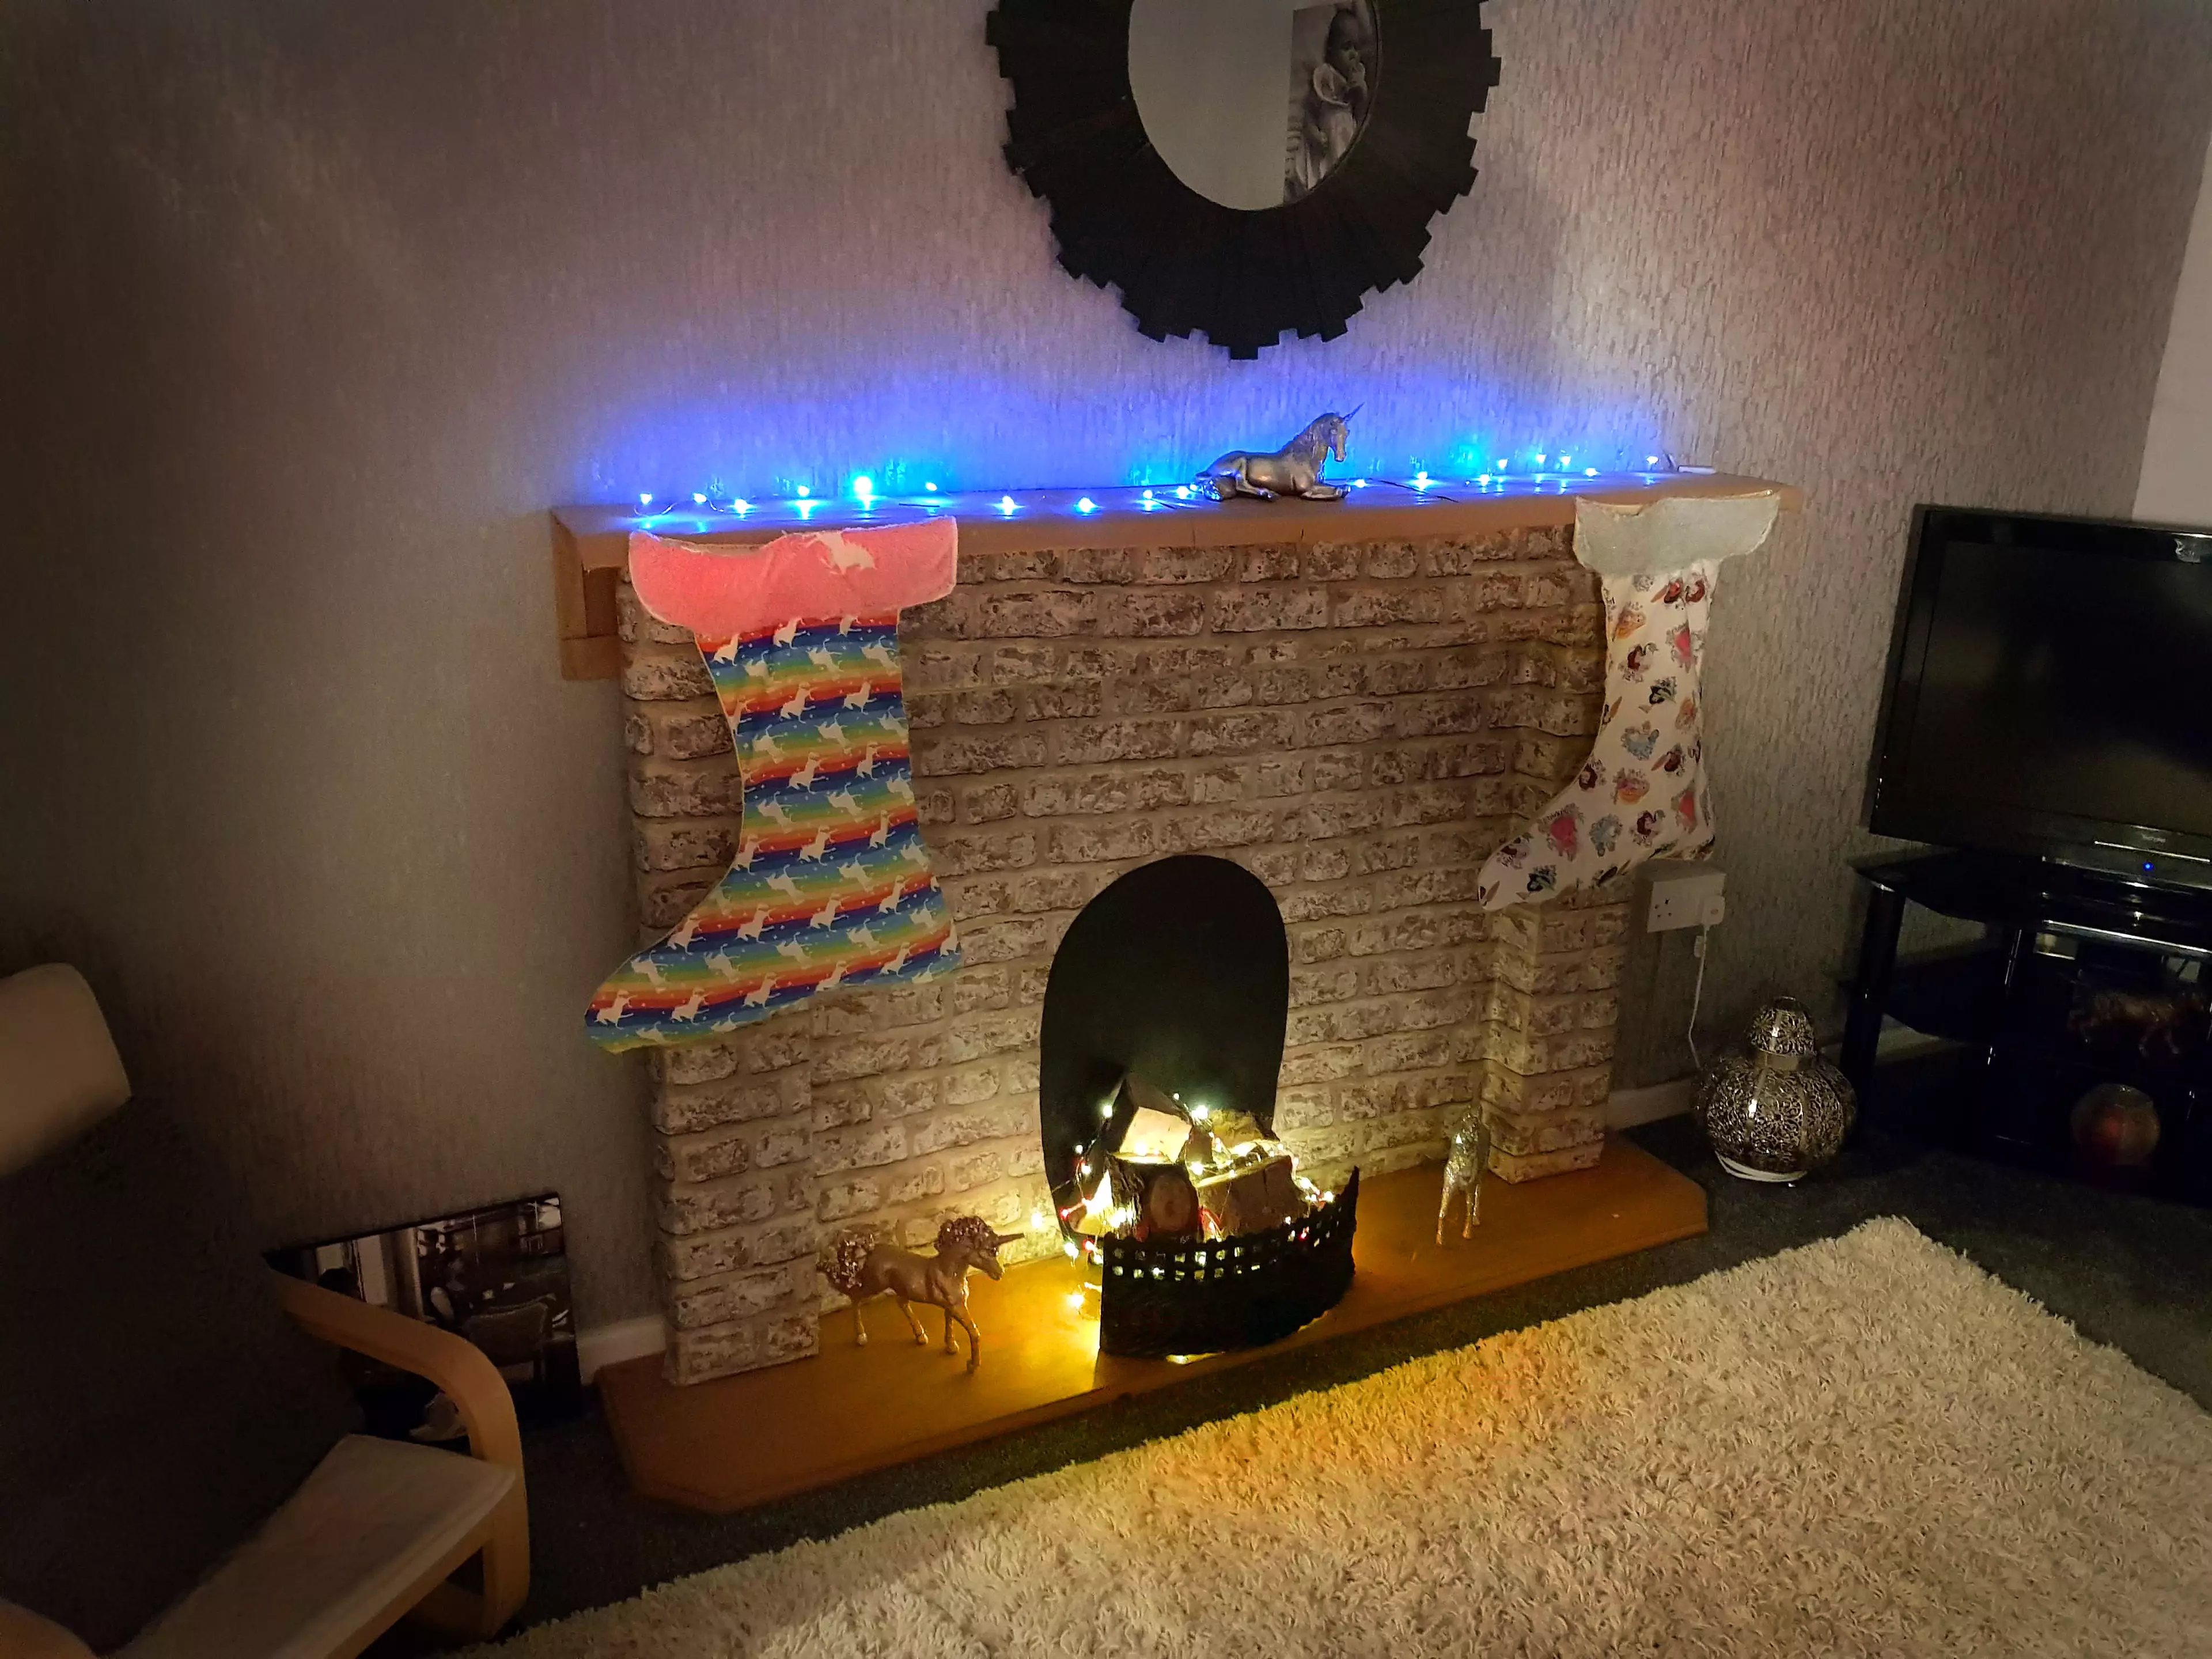 A Chester mum has built her own fireplace for £2. (